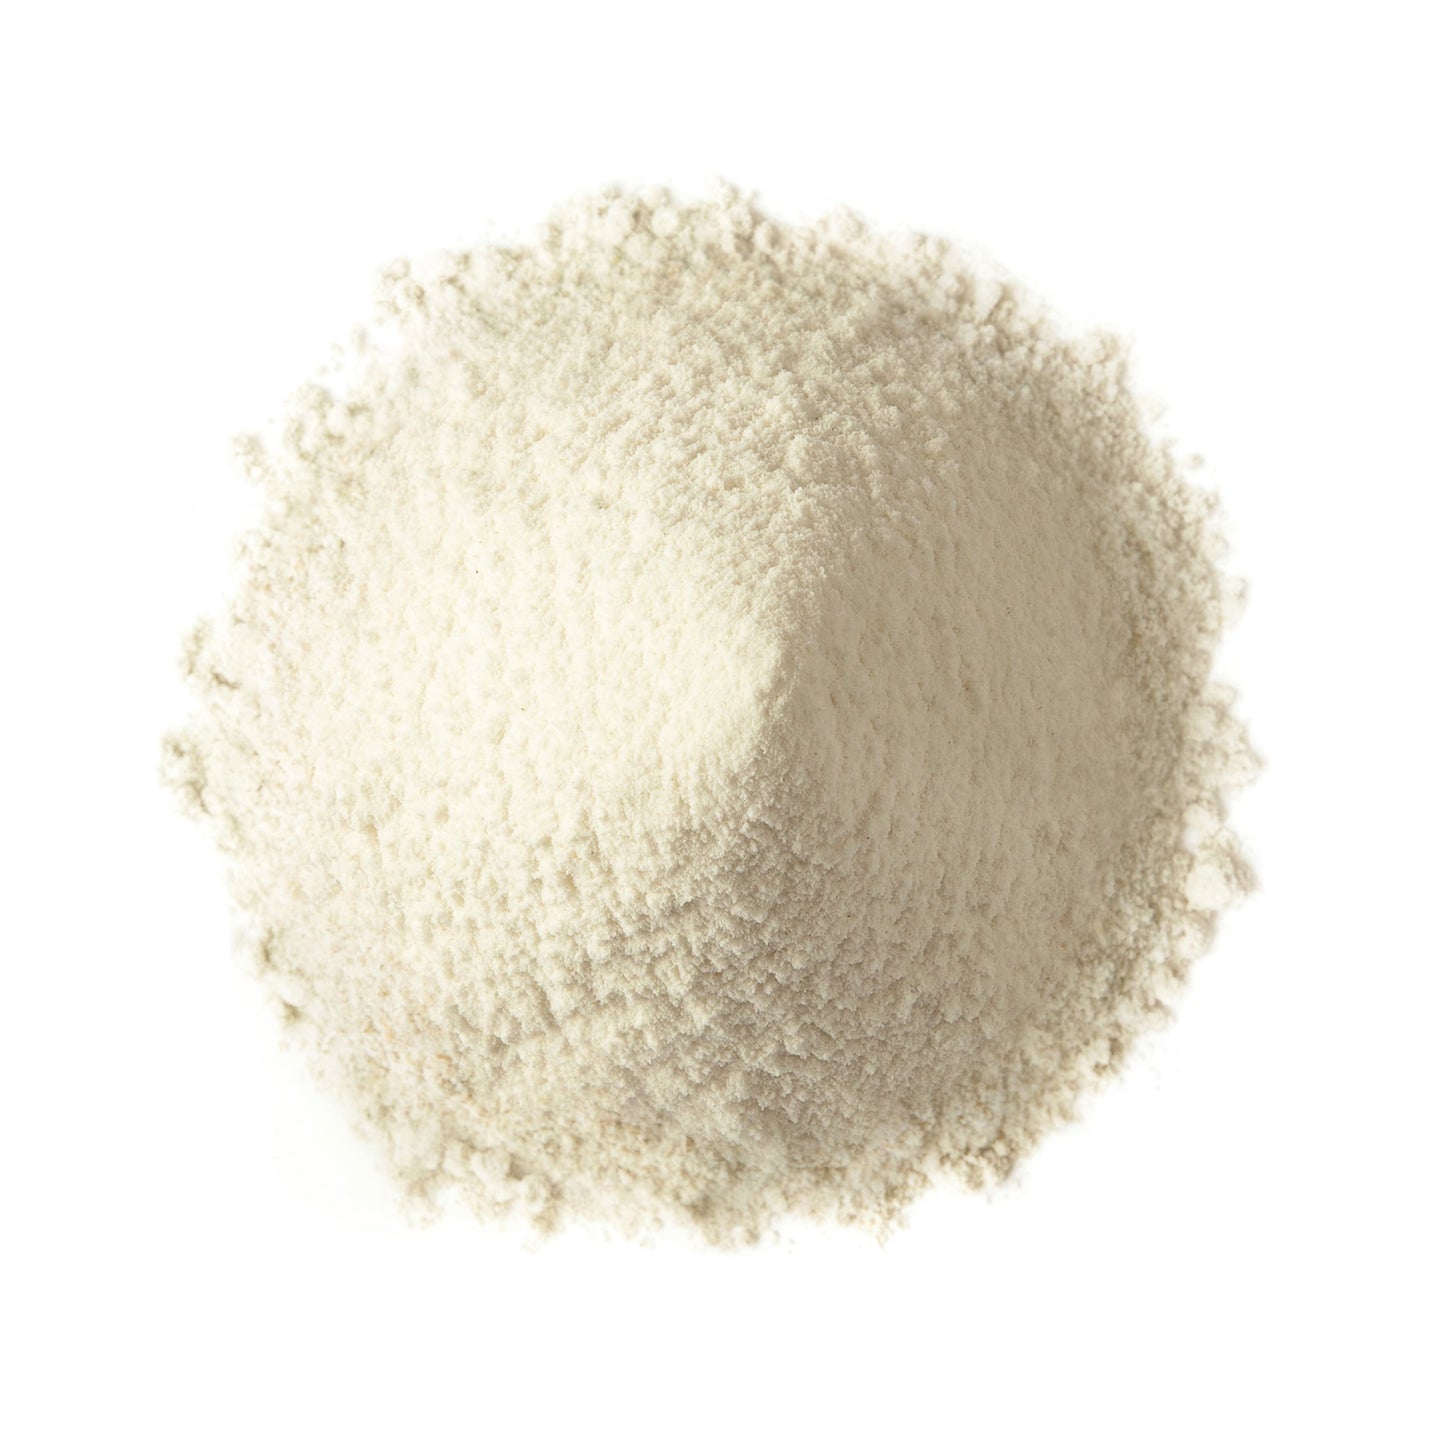 Lime Powder - Unsulfured, Made from Raw Dried Citrus Fruit, Vegan, Bulk, Great for Juices, Smoothies, Yogurts, and Instant Breakfast Drinks, Contains Maltodextrin, No Sulphites